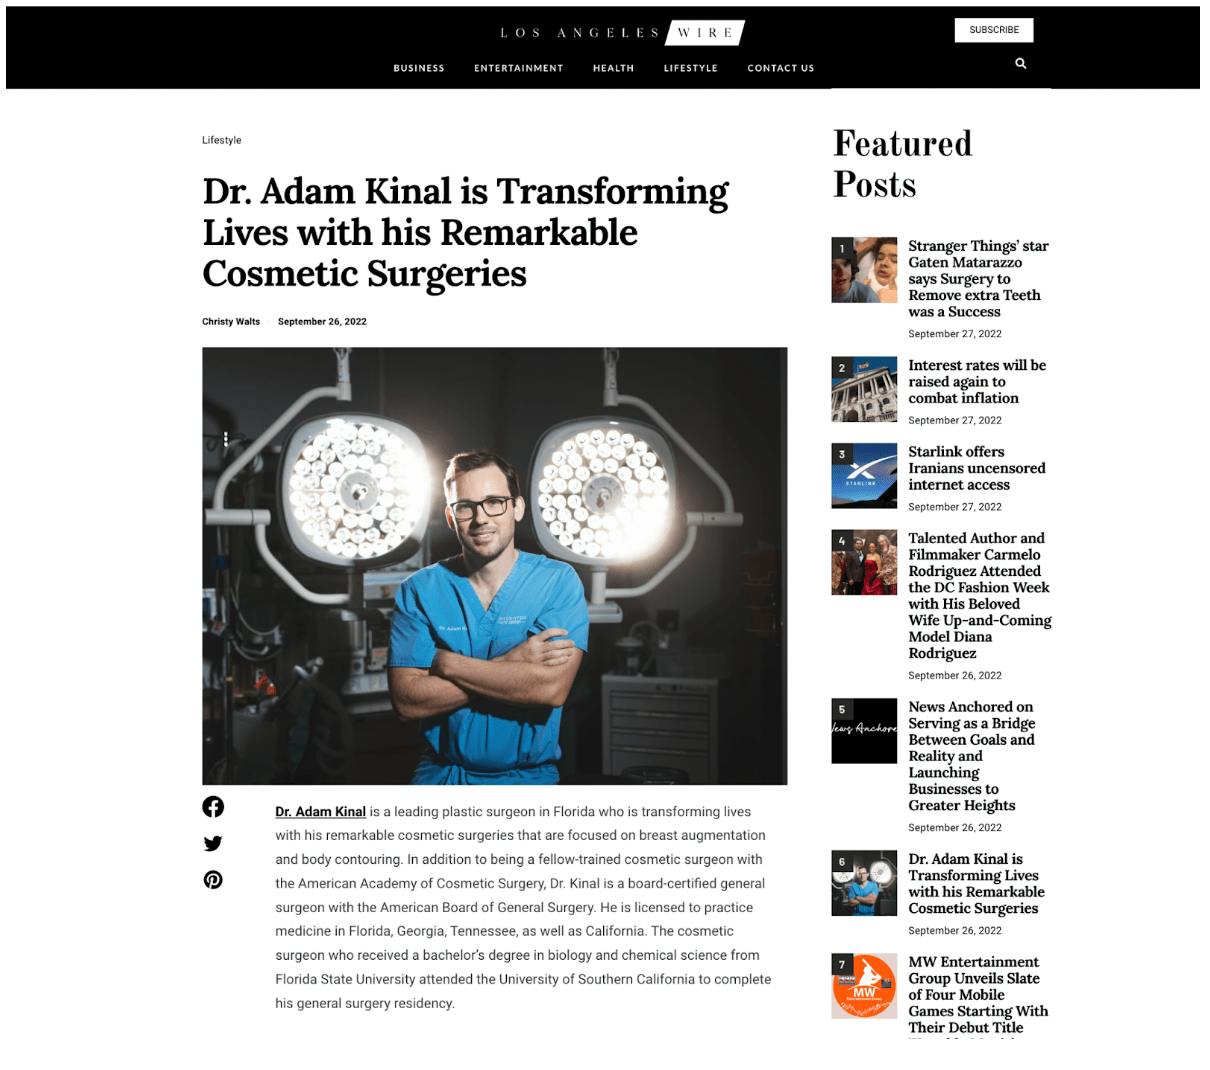 Dr. Adam Kinal is Transforming Lives with his Remarkable Cosmetic Surgeries